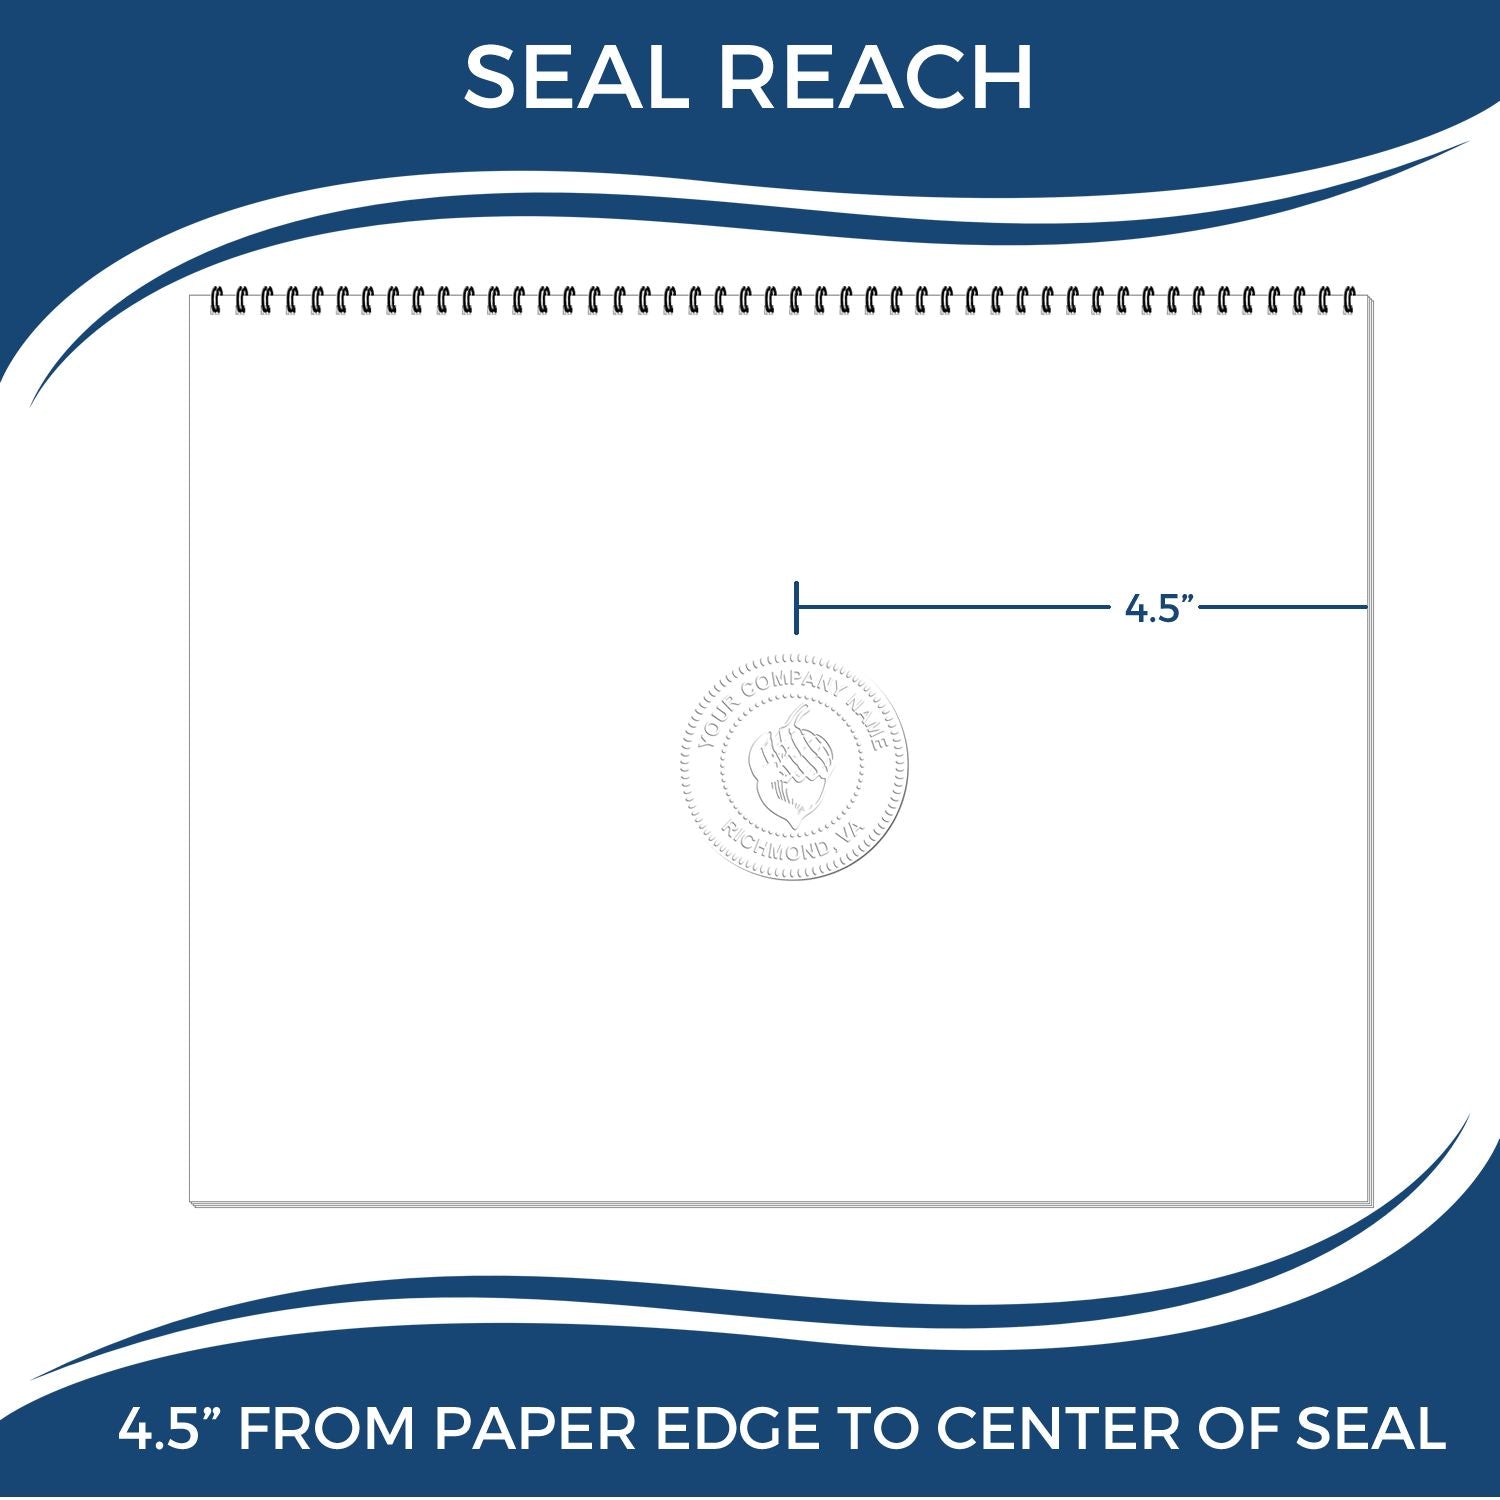 An infographic showing the seal reach which is represented by a ruler and a miniature seal image of the State of Tennessee Extended Long Reach Landscape Architect Seal Embosser